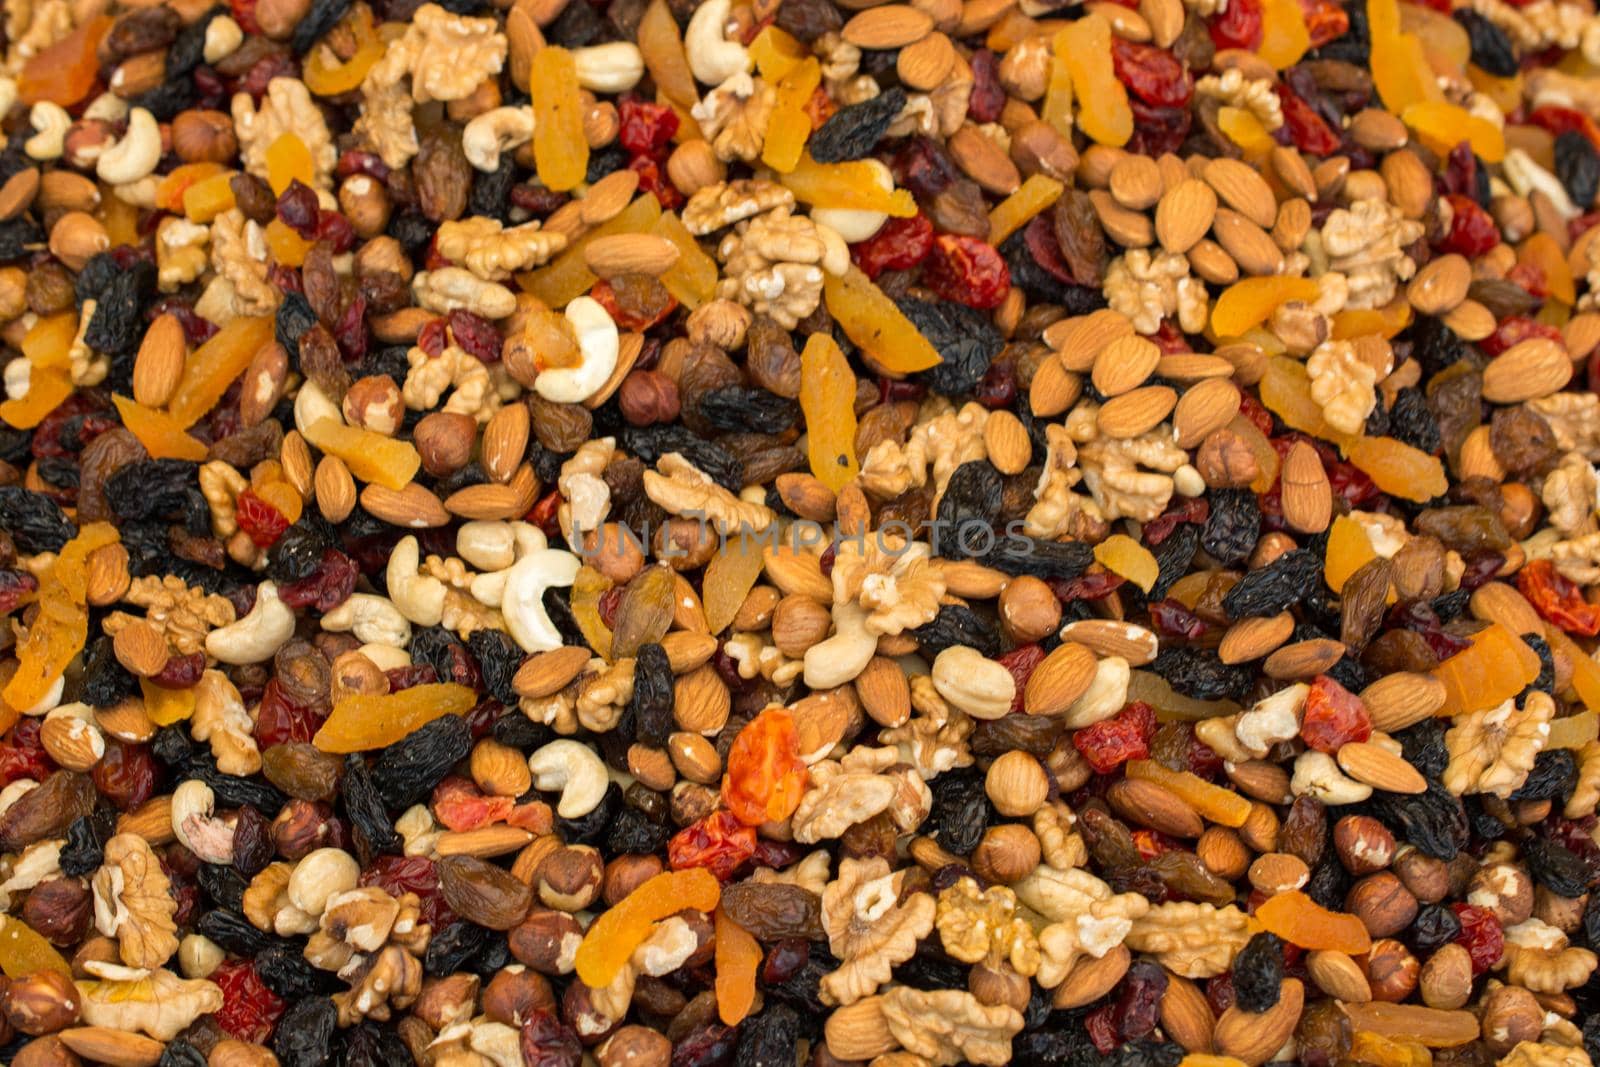 Pile of assorted nuts and seeds in the view